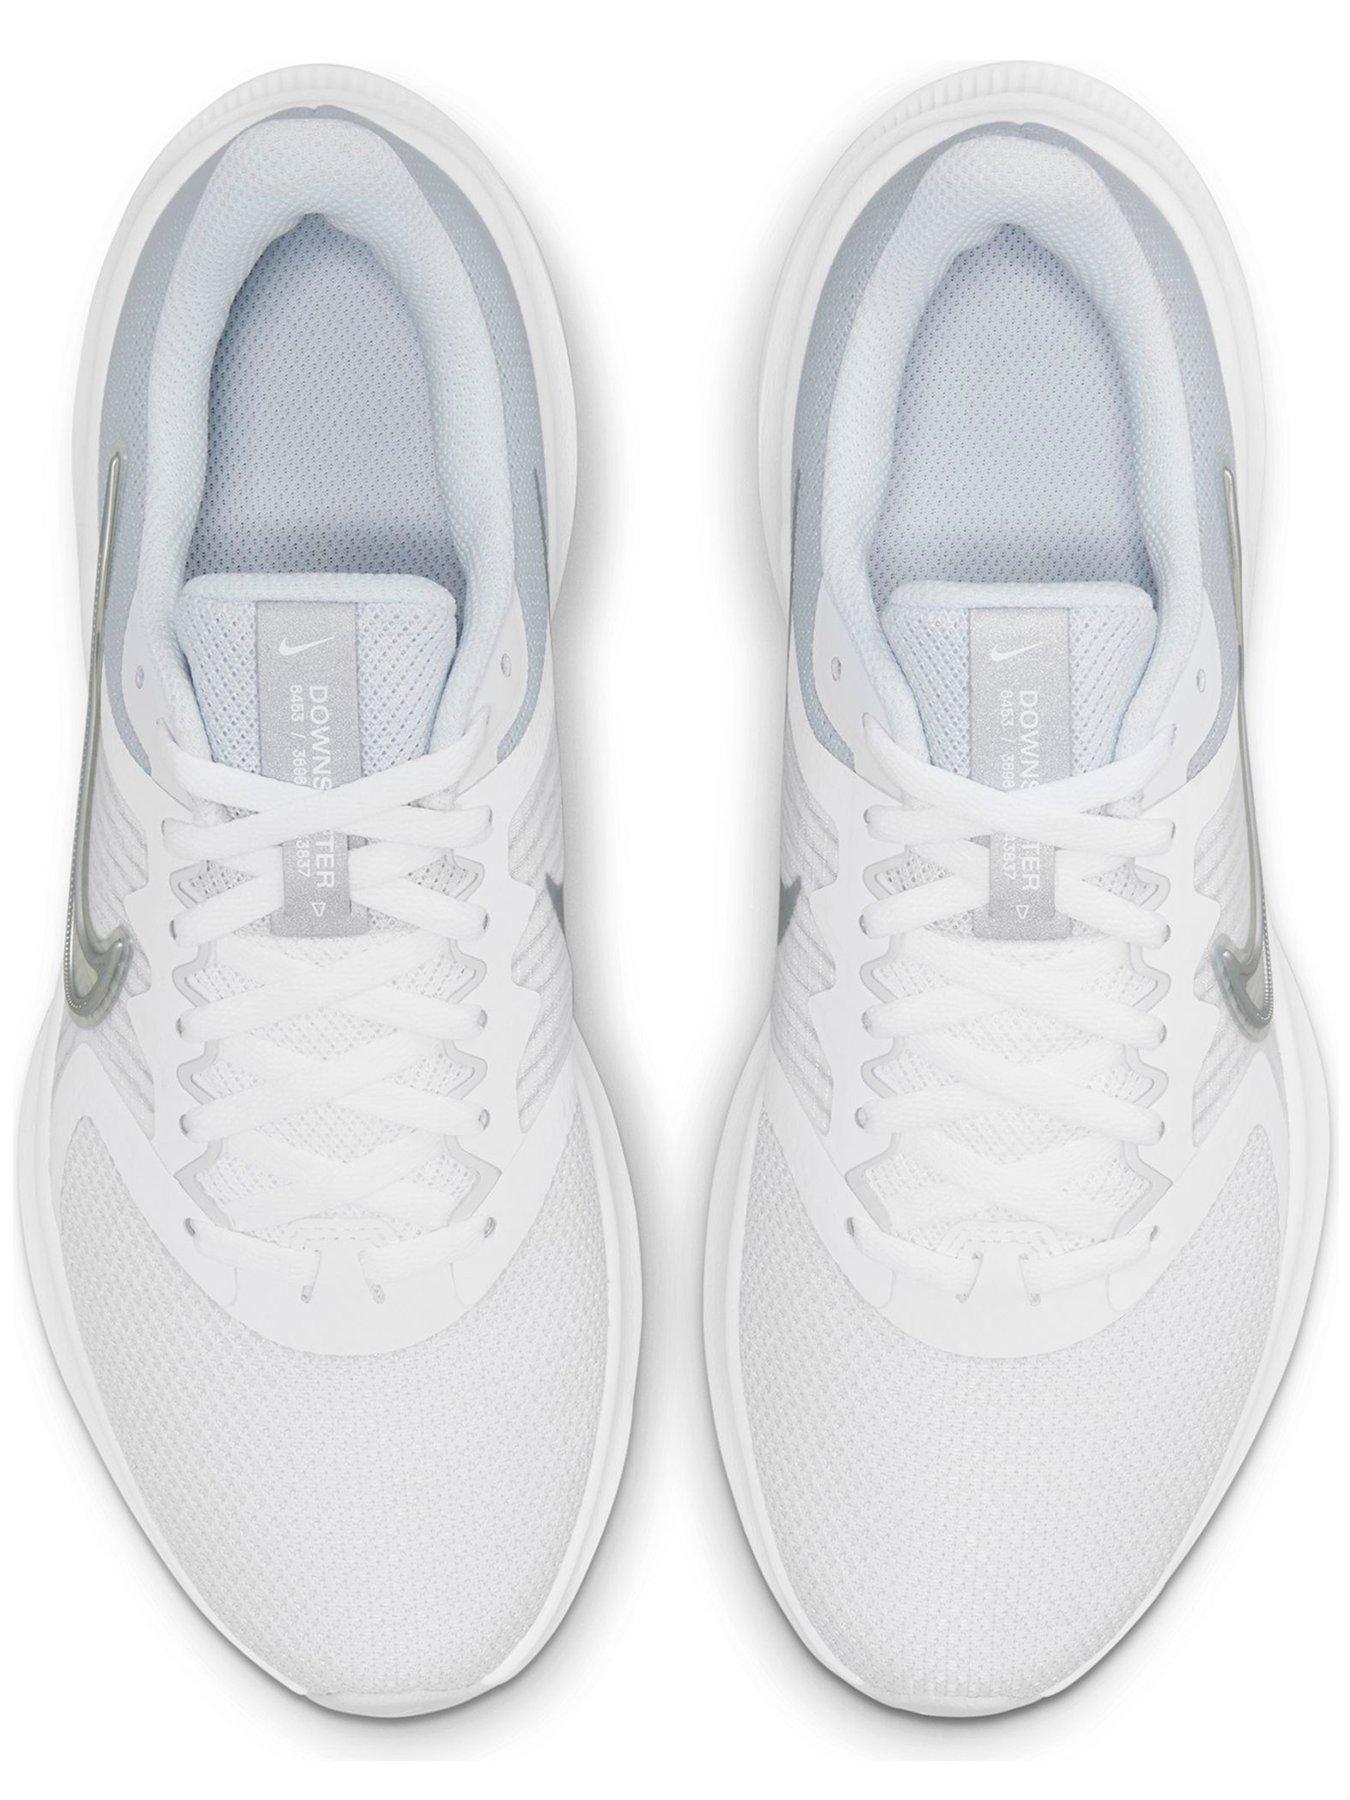 Trainers Downshifter 11 - White/Silver